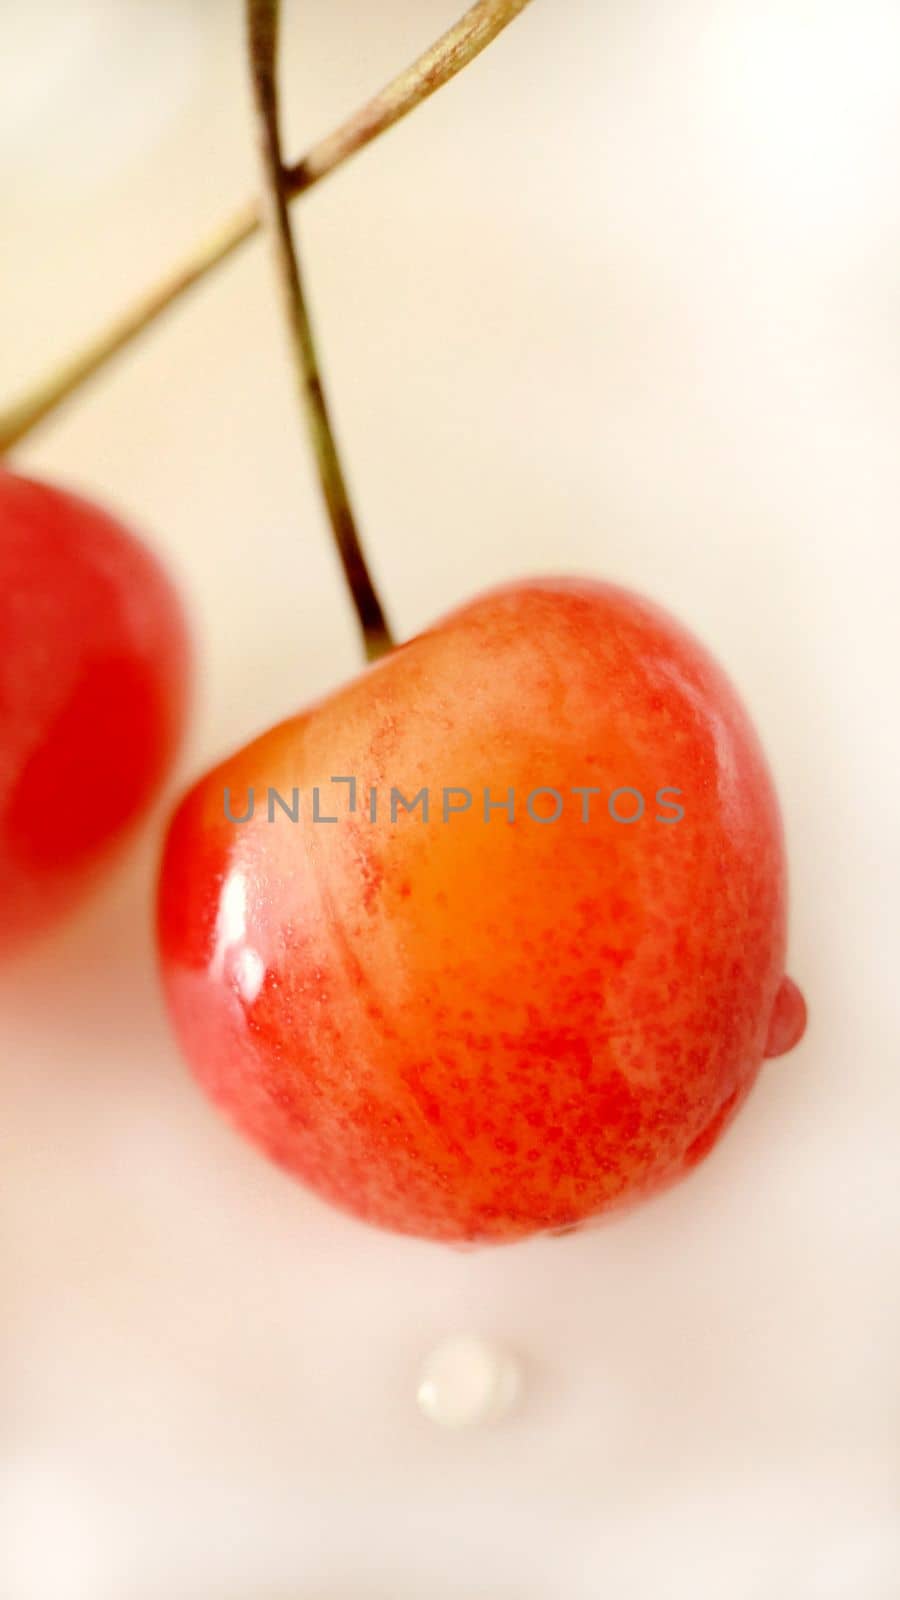 Two ripe red-yellow cherries close-up on a light background by Mastak80